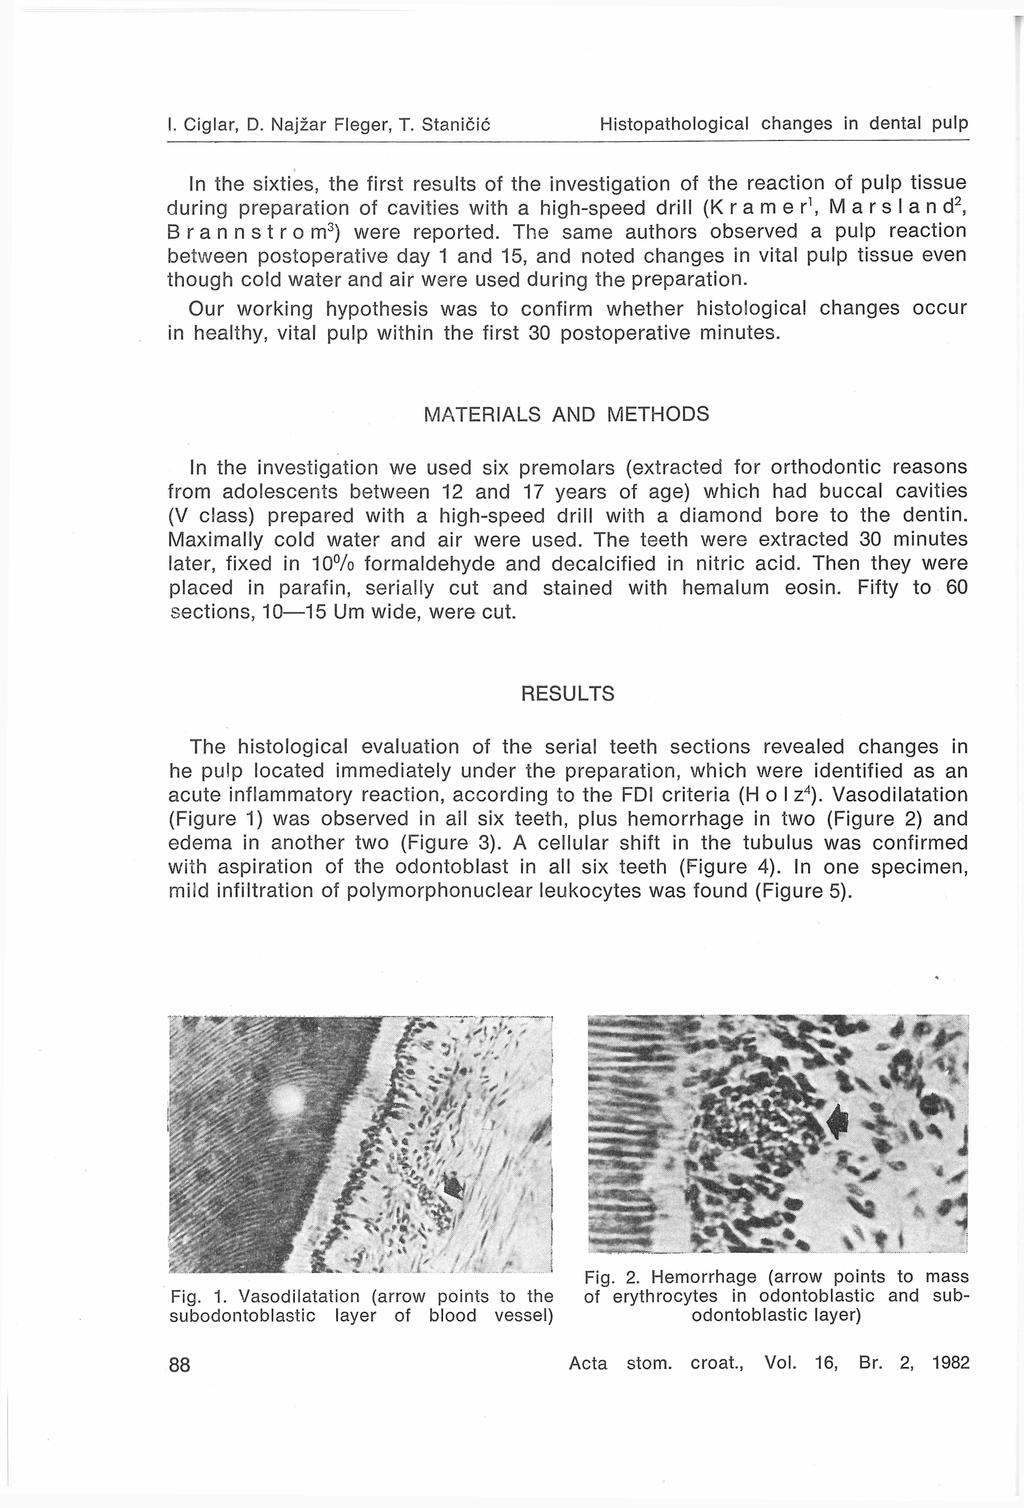 In the sixties, the first results of the investigation of the reaction of pulp tissue during preparation of cavities with a high-speed drill ( K r a m e r 1, M a r s I a n d B r a n n s t r o m3)